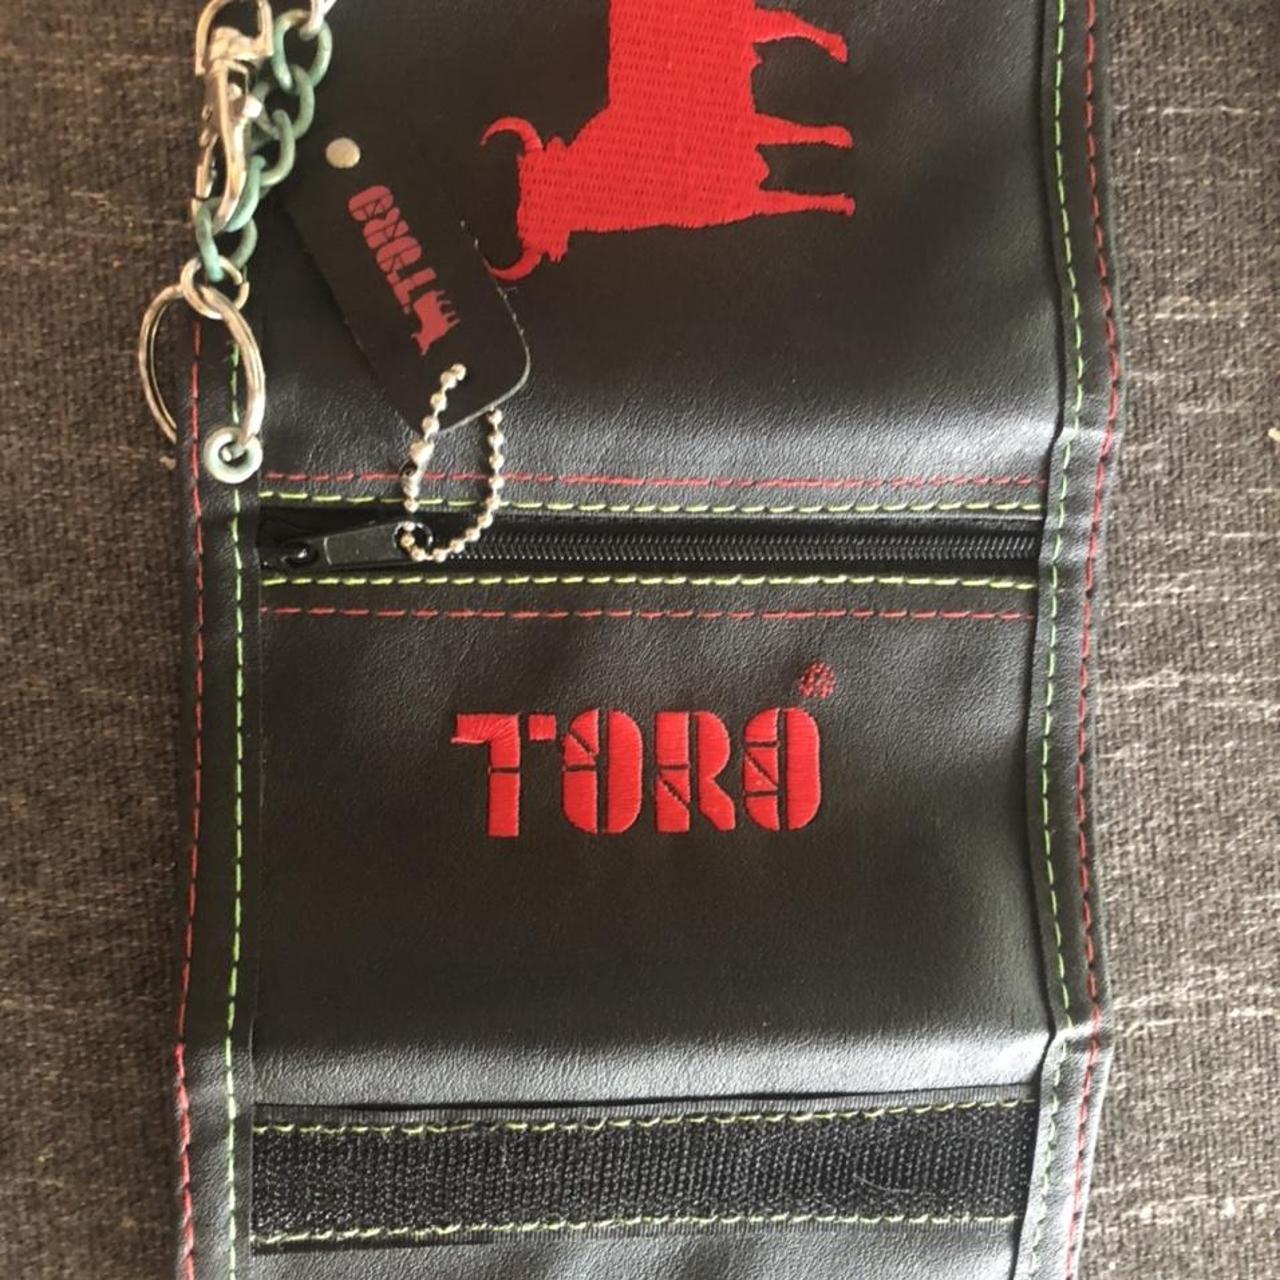 Product Image 1 - Toro Wallet Bull Fight Design
Made